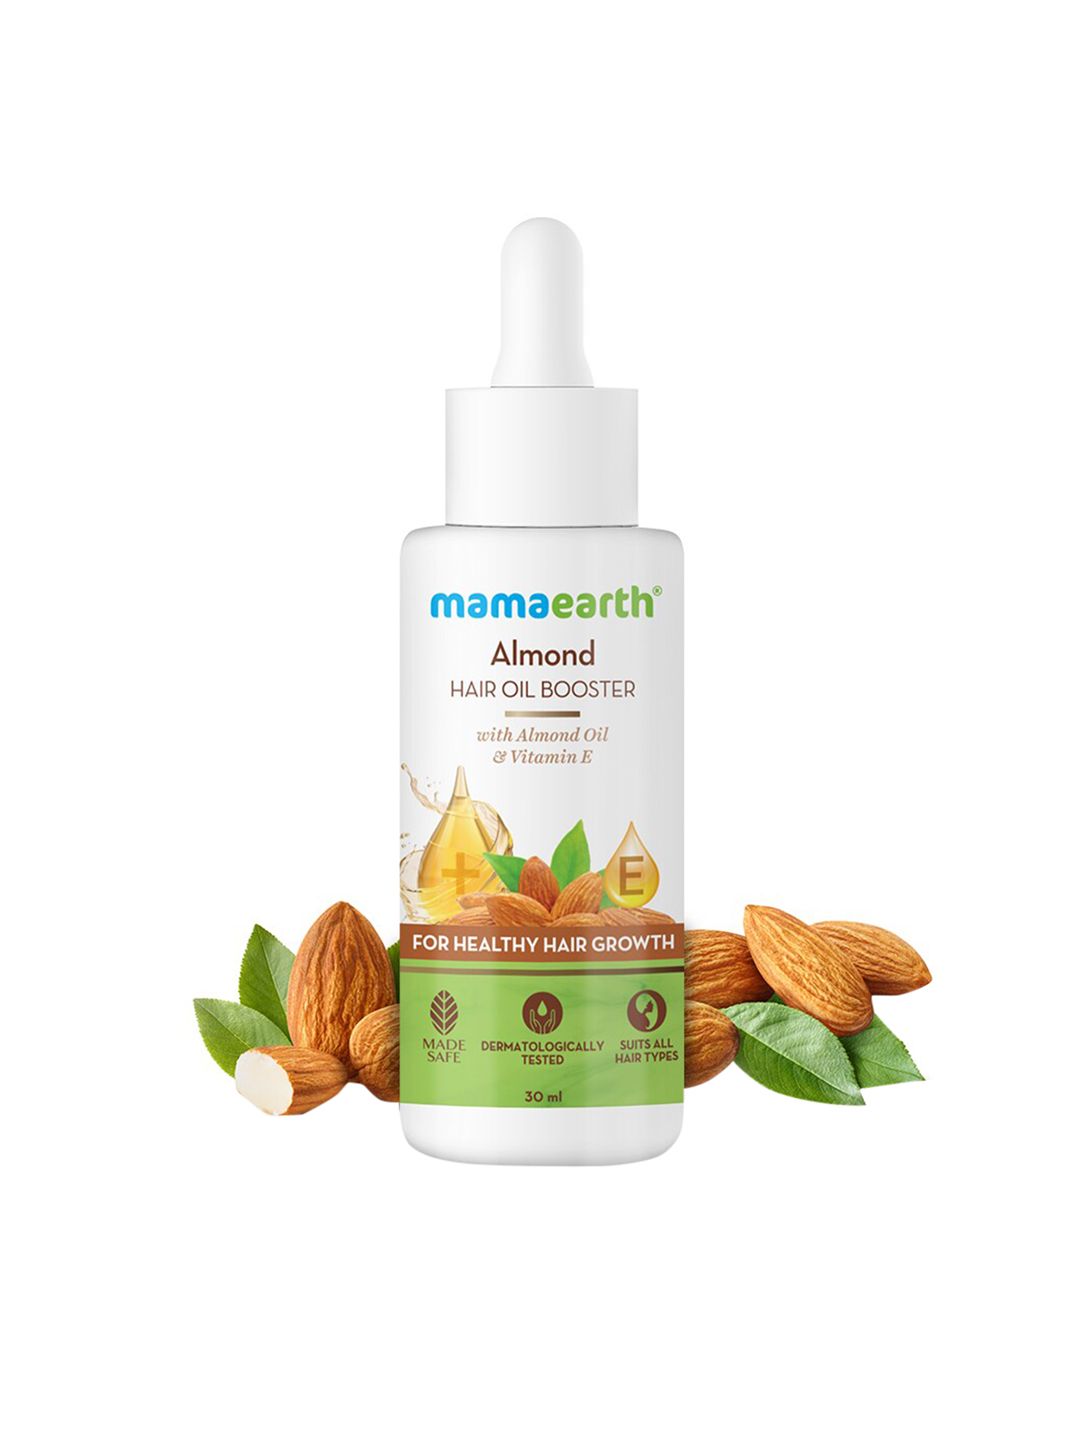 Mamaearth Almond Hair Oil Booster with Almond Oil & Vitamin E & for Healthy Hair Growth - 30 ml Price in India